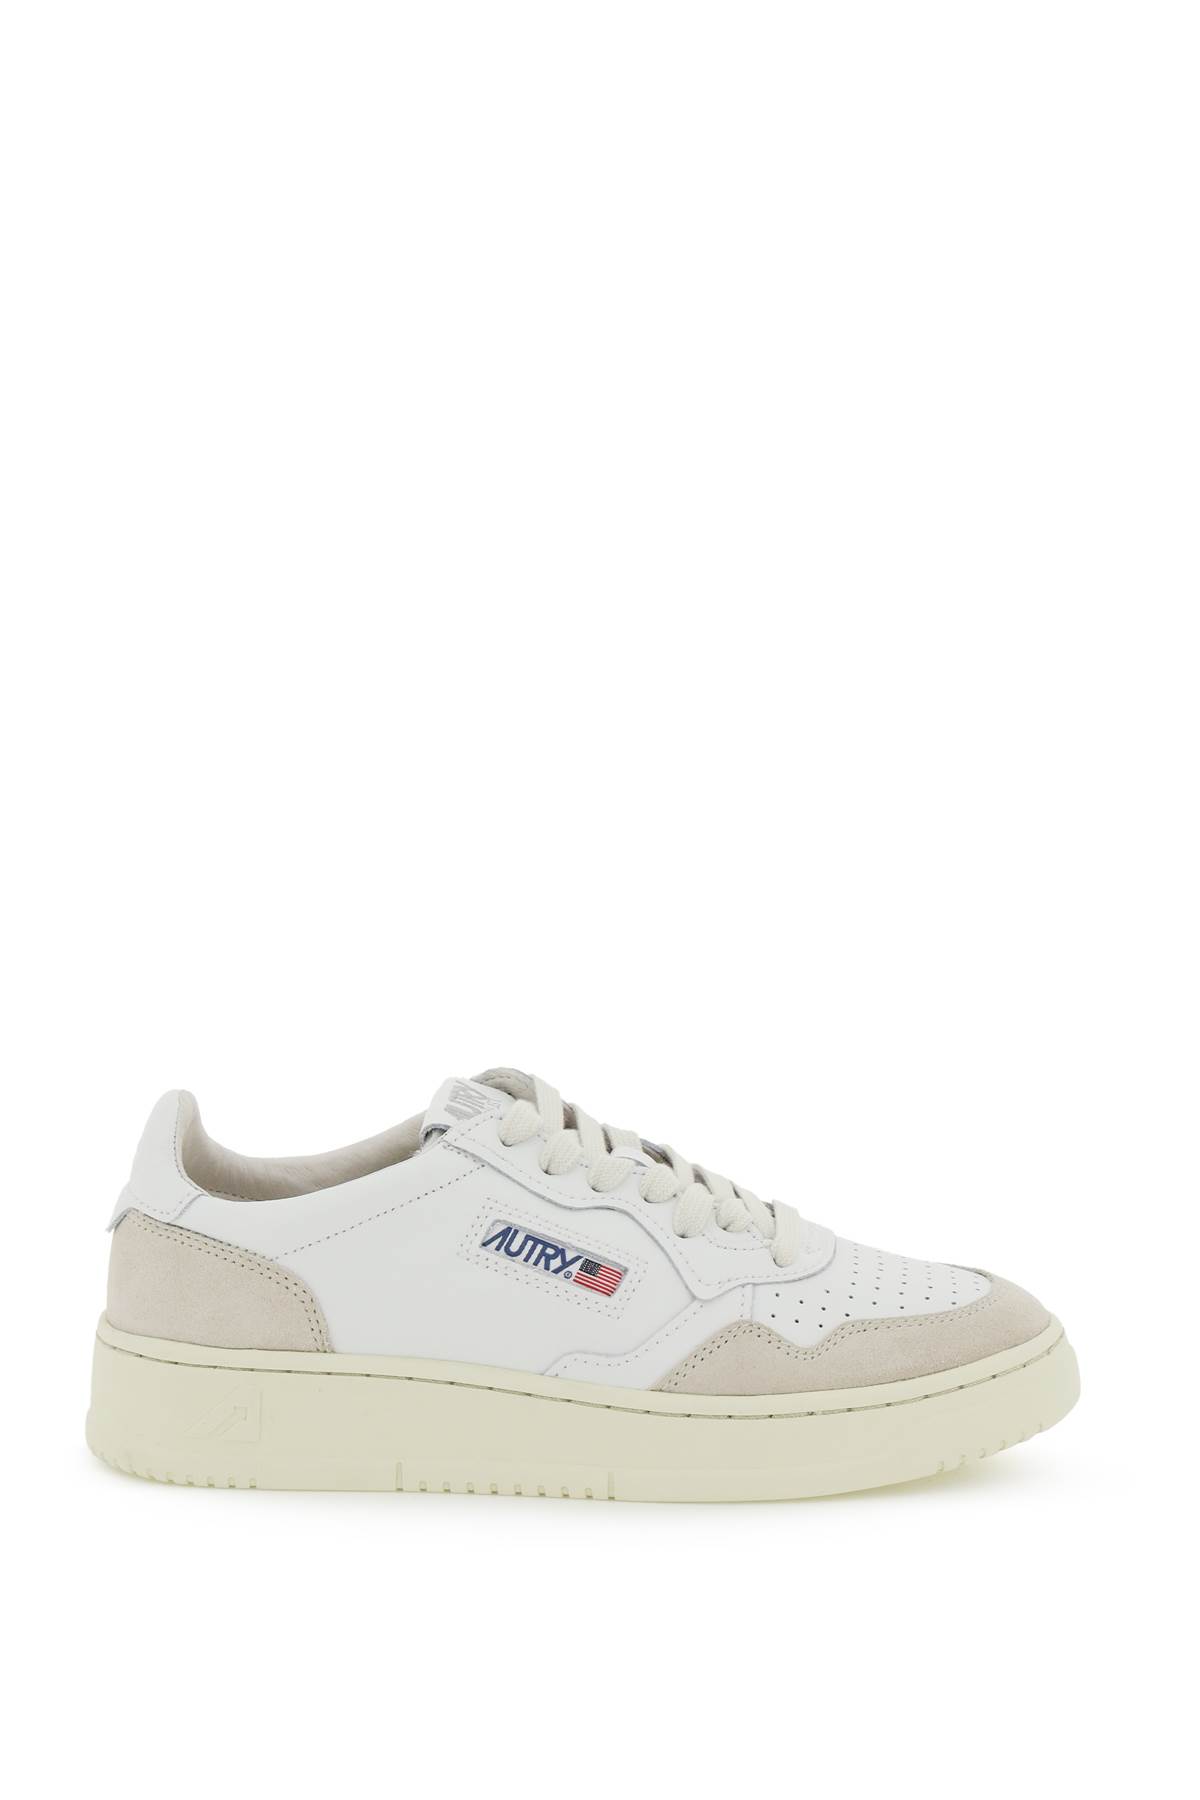 Autry Leather Medalist Low Sneakers